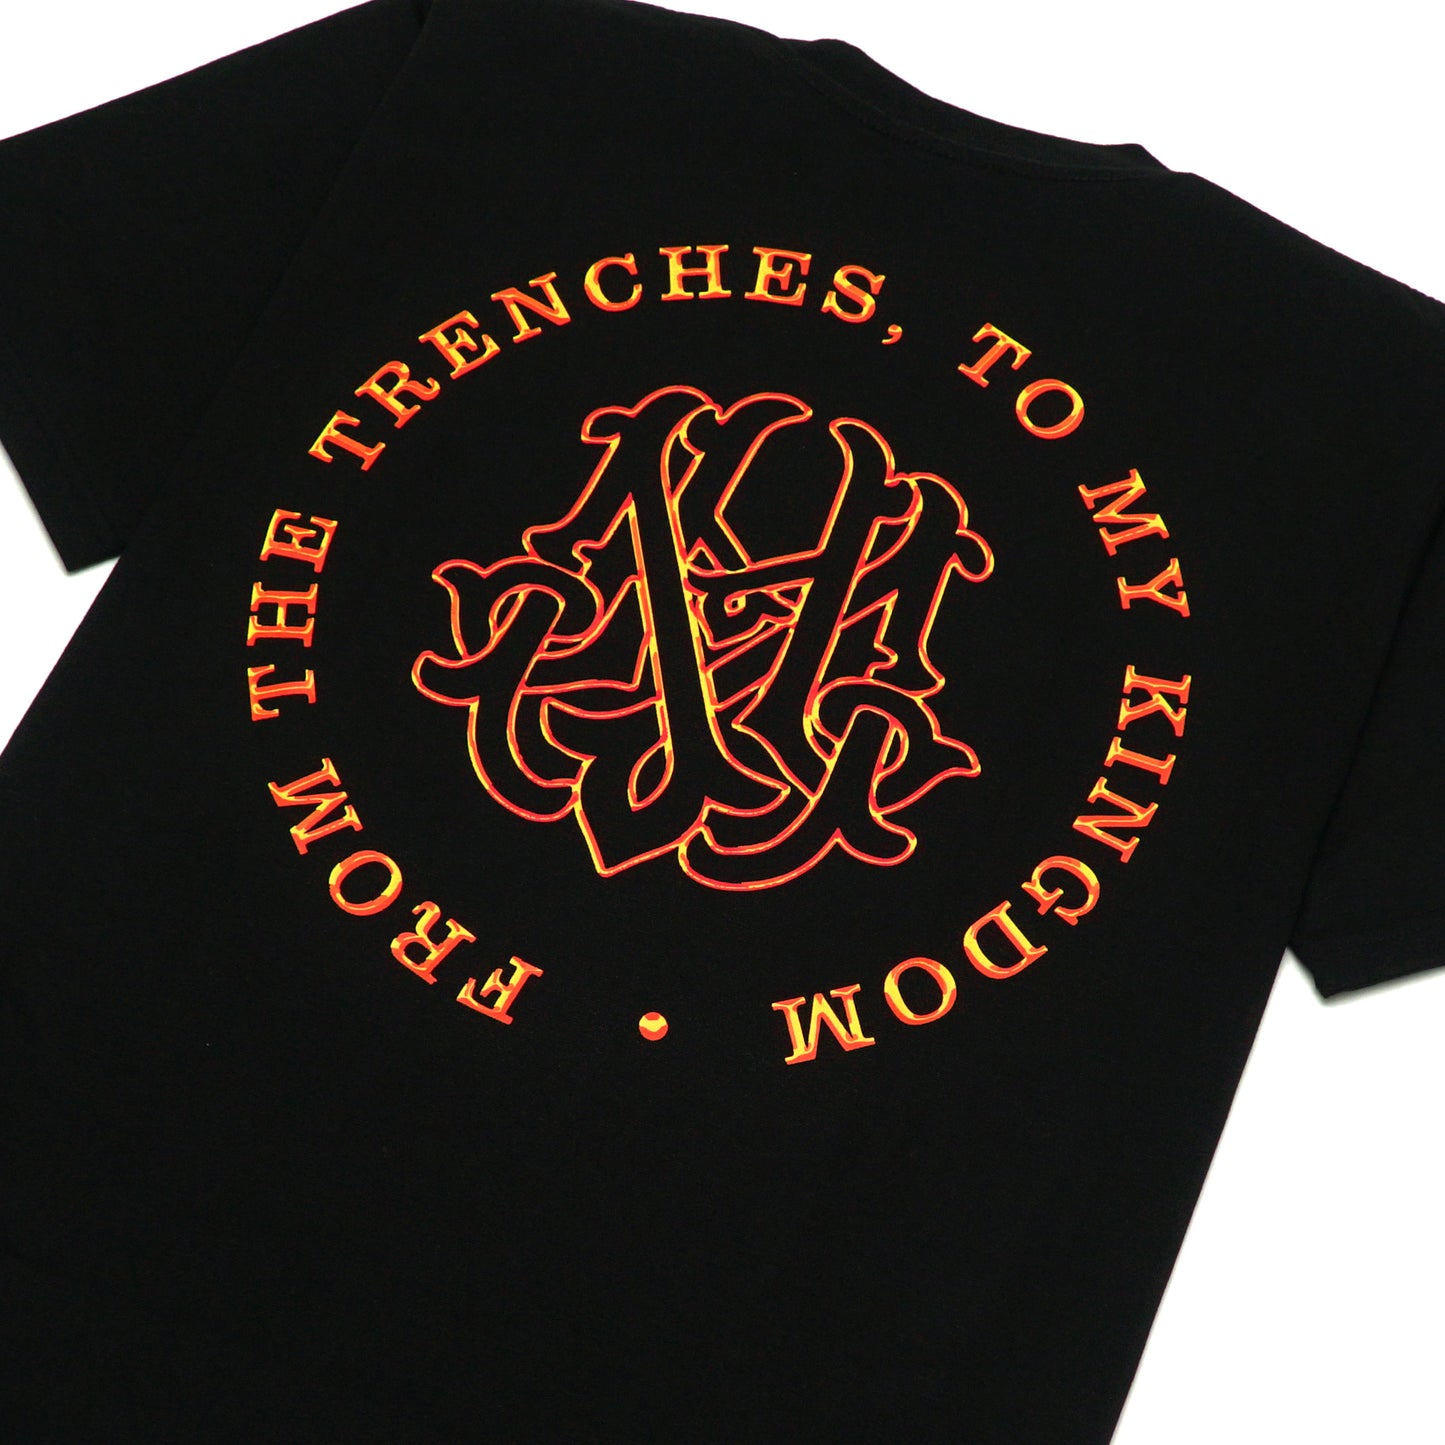 From Trenches Tee